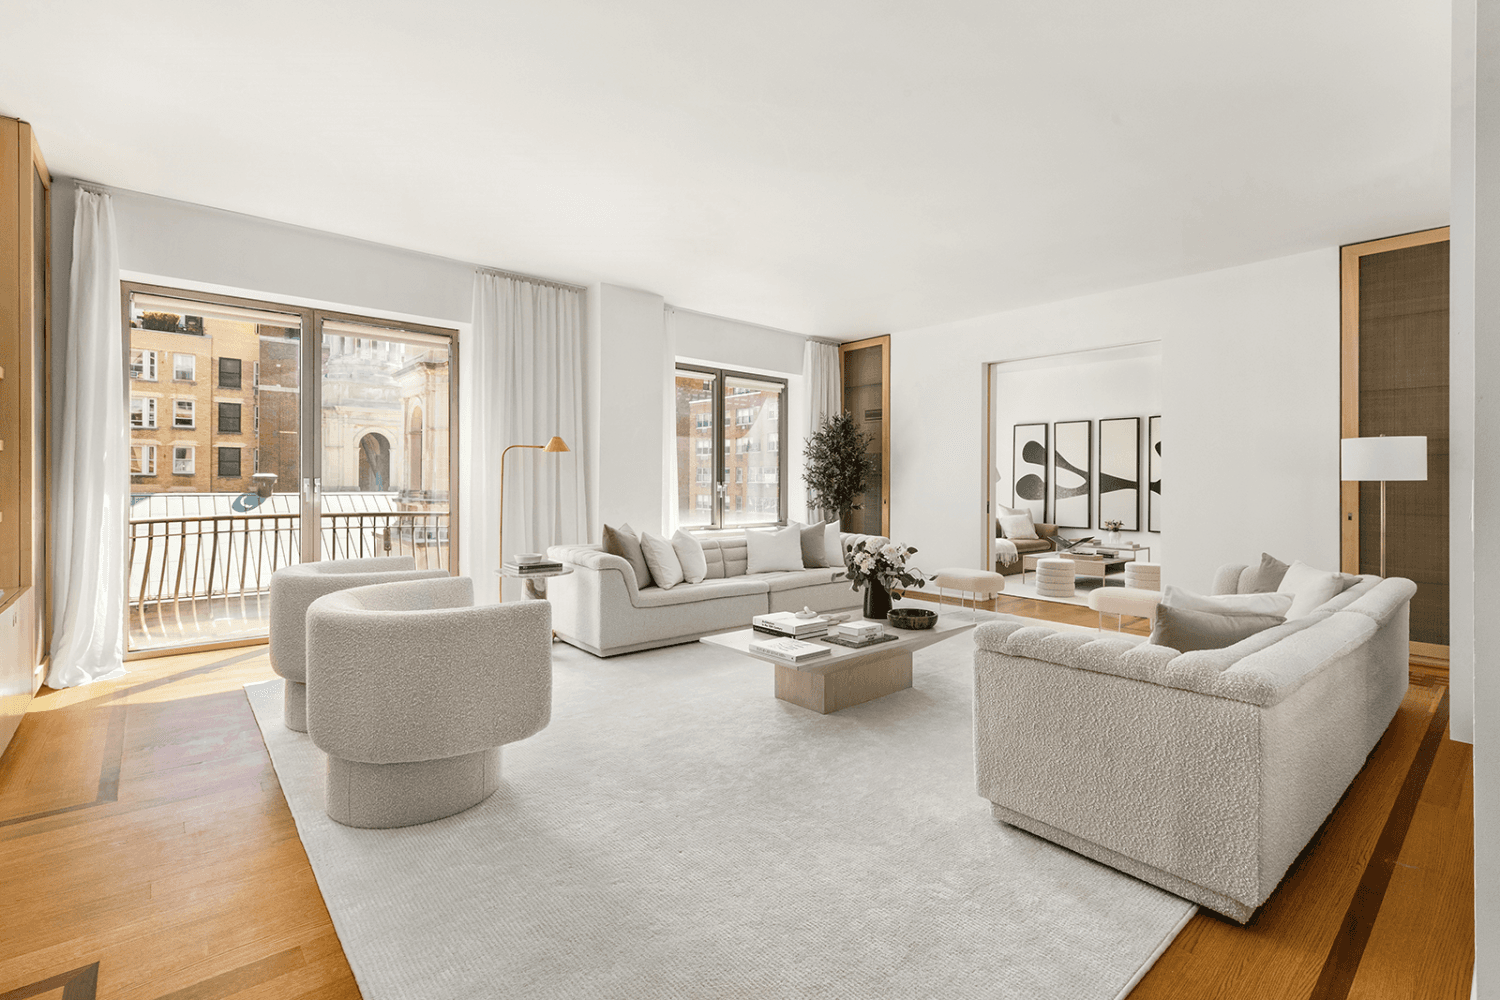 Modern Grand Elegant Condo of almost 4000 Sq Ft amp ; 5 Bedrooms on a High Floor in a Prime Upper East Side LocationIntroducing a grand scale modern 5 bedroom ...